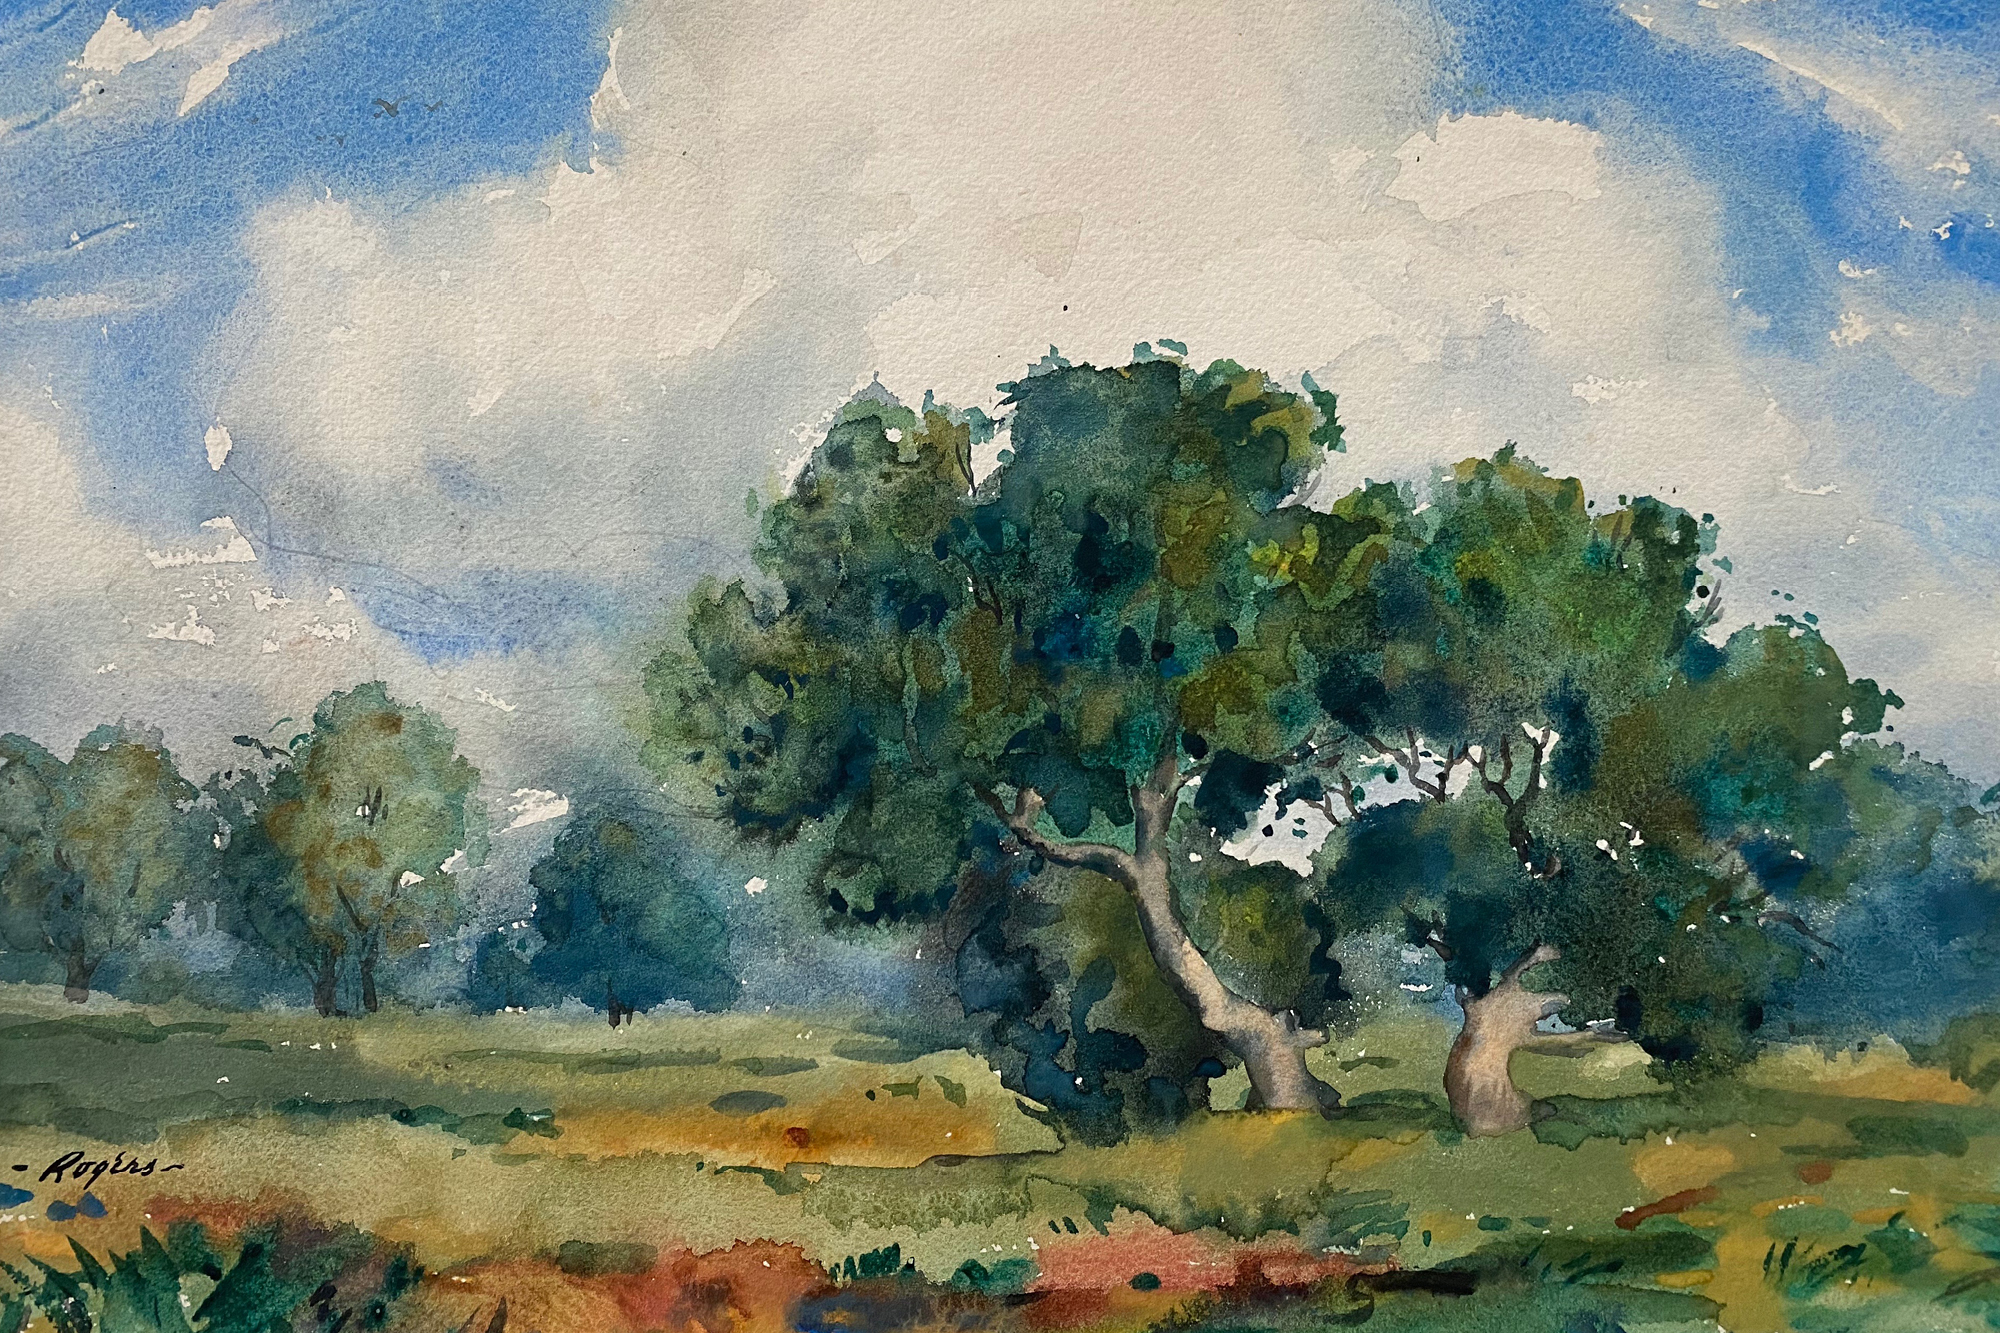 A photo of a painting of trees and clouds.